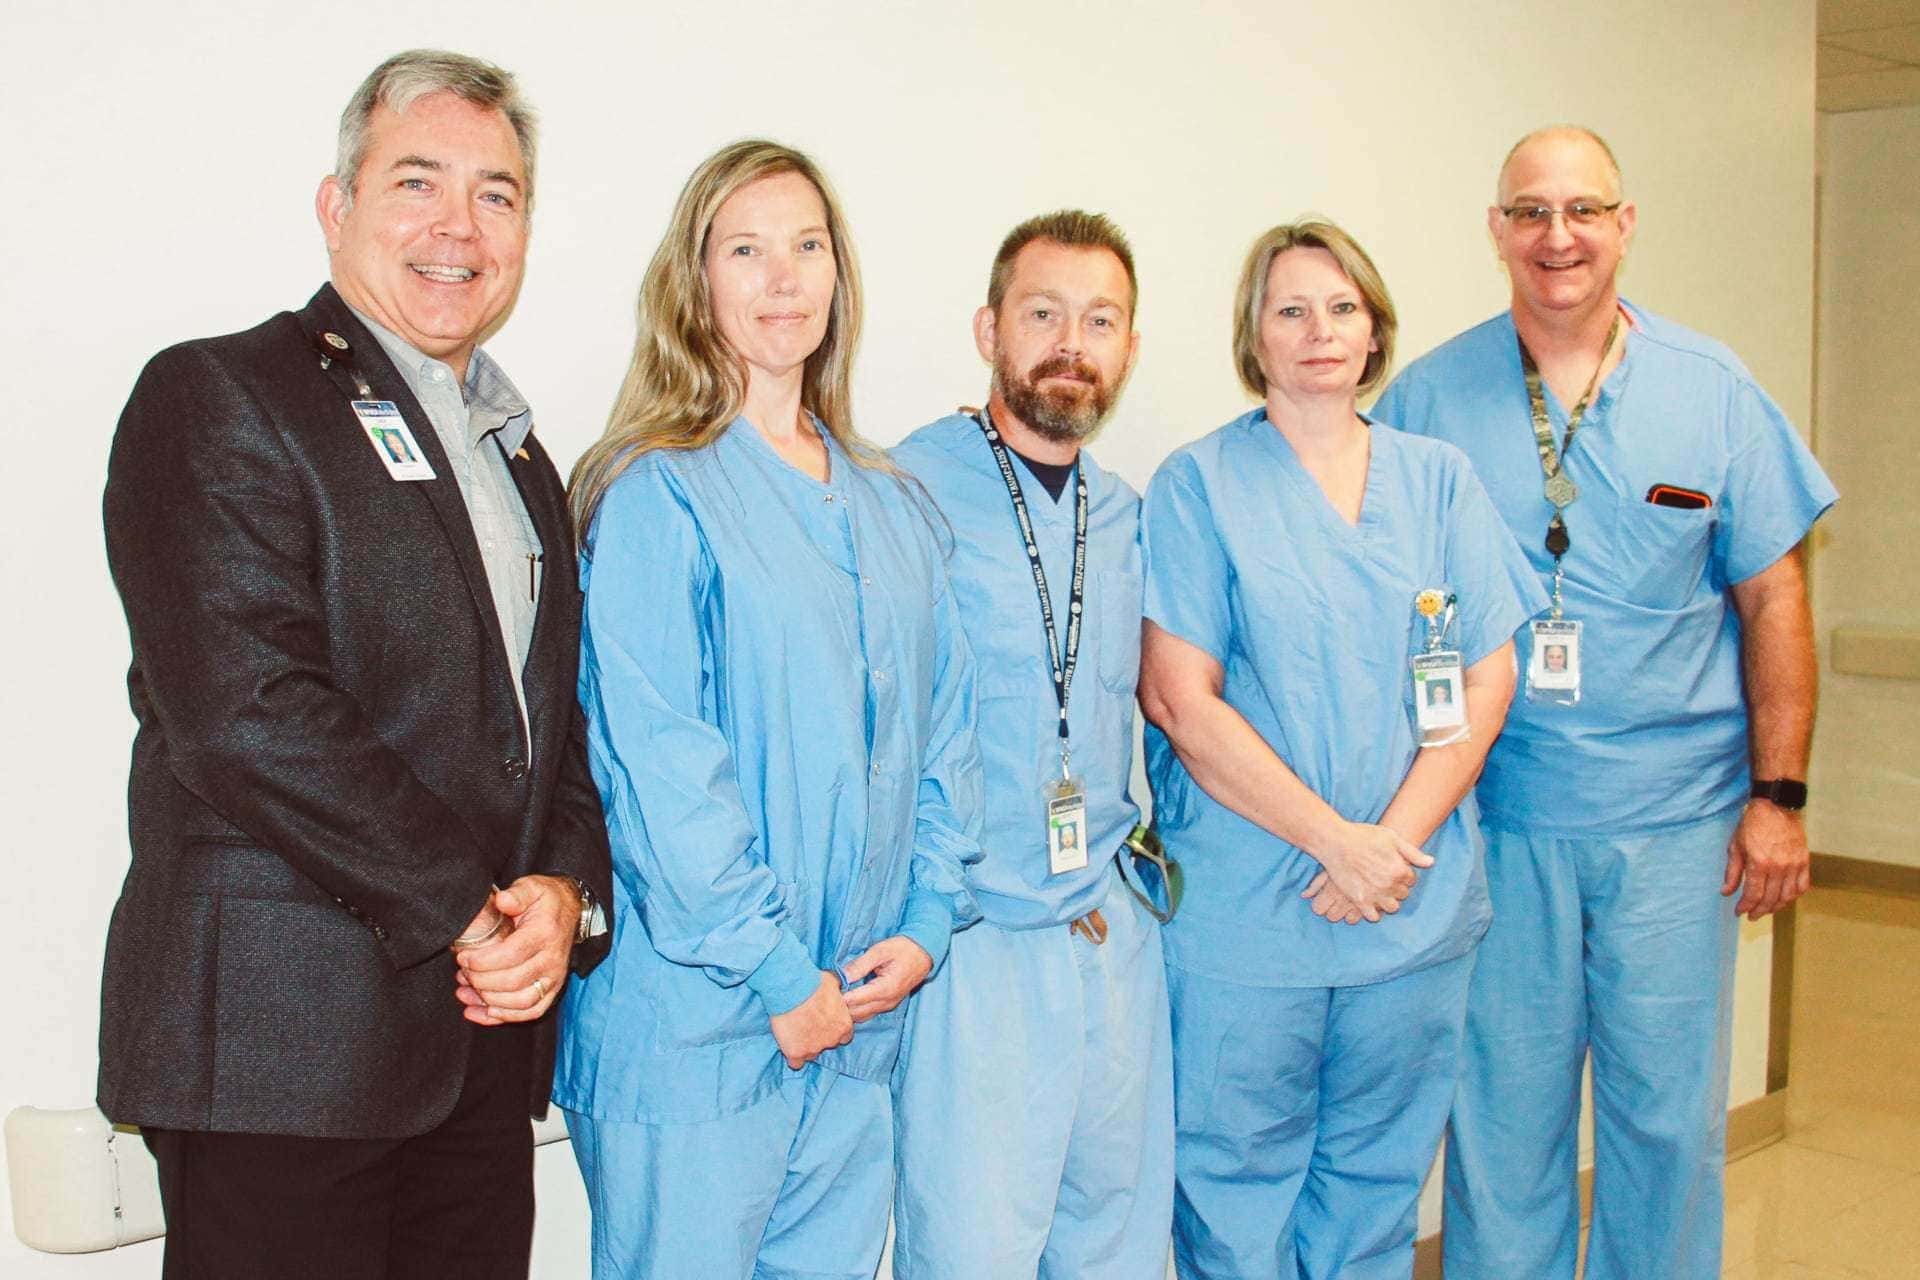 Pictured, left to right: Skip Gjolberg, President; Surgical Technologists: Sue Tenney, Robert Goodwin, and Beatrice Mayle; Kevin Stingo, Manager, Perioperative Services